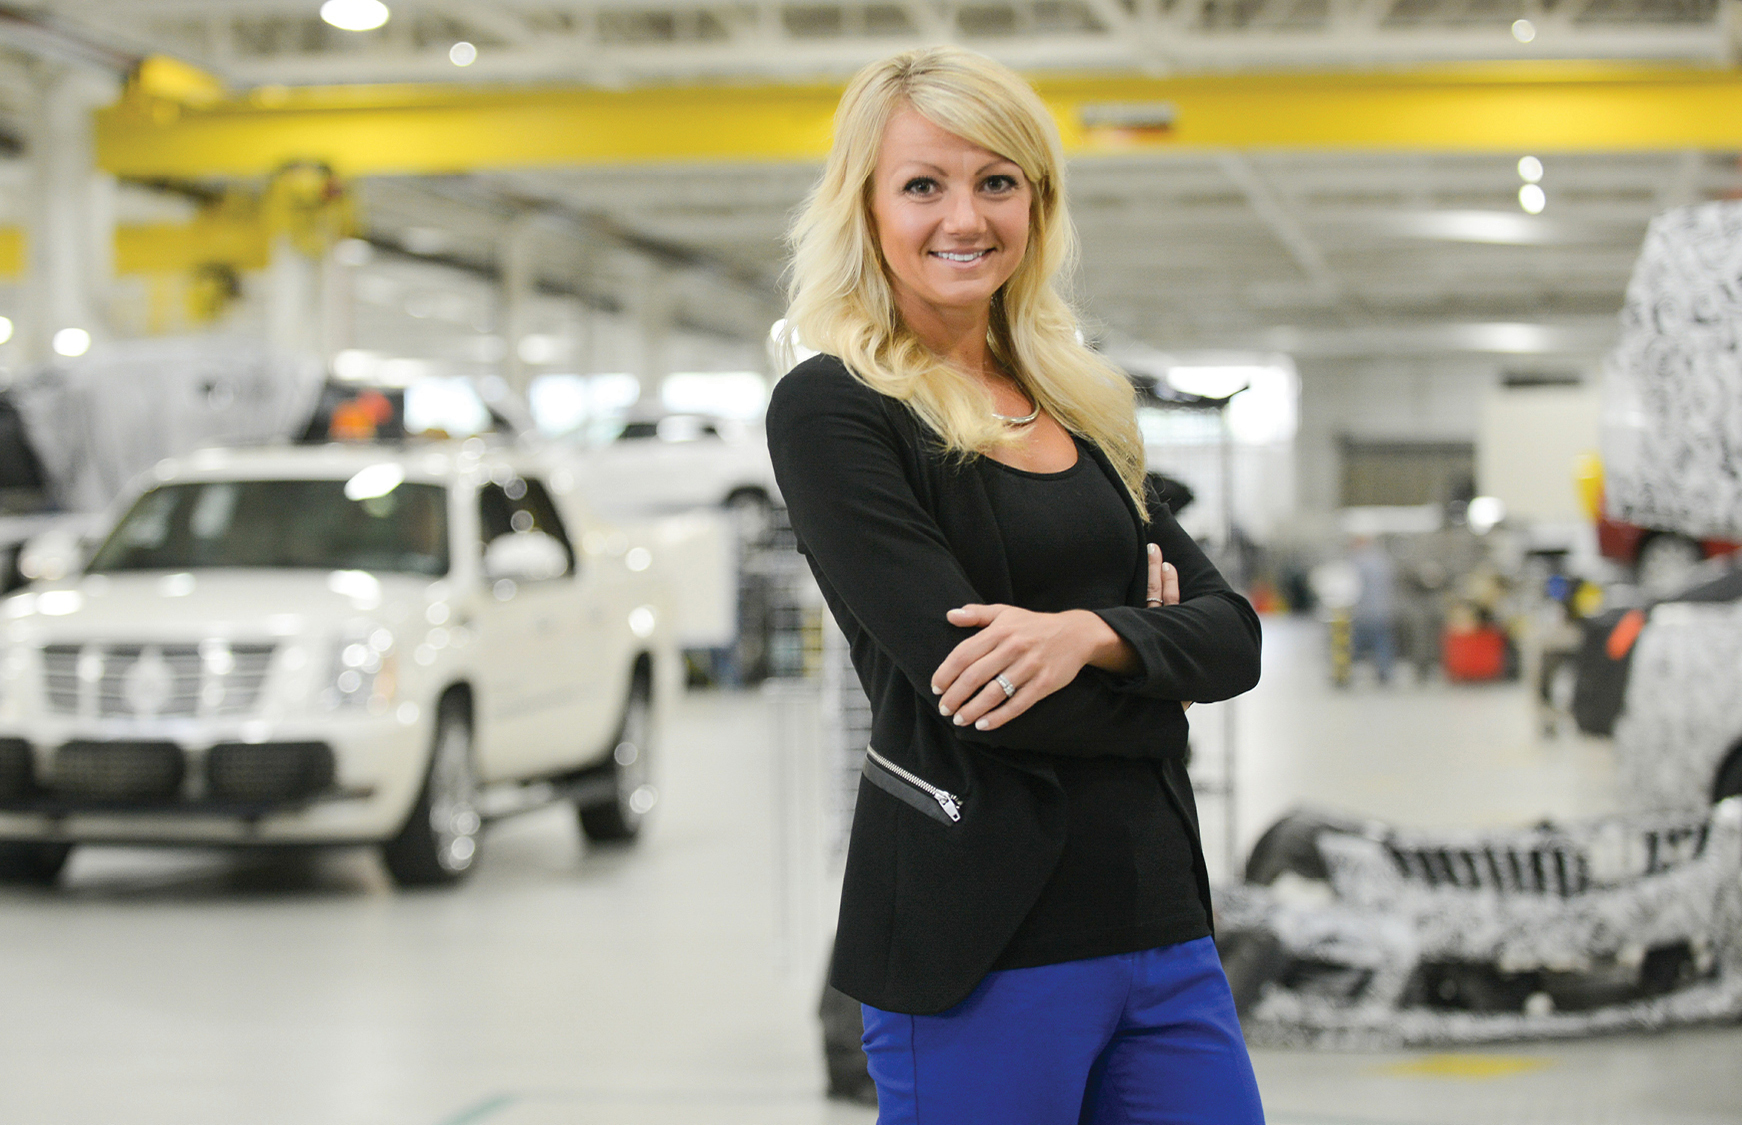 Mandi Damman on Life as a Woman in Engineering at GM Image